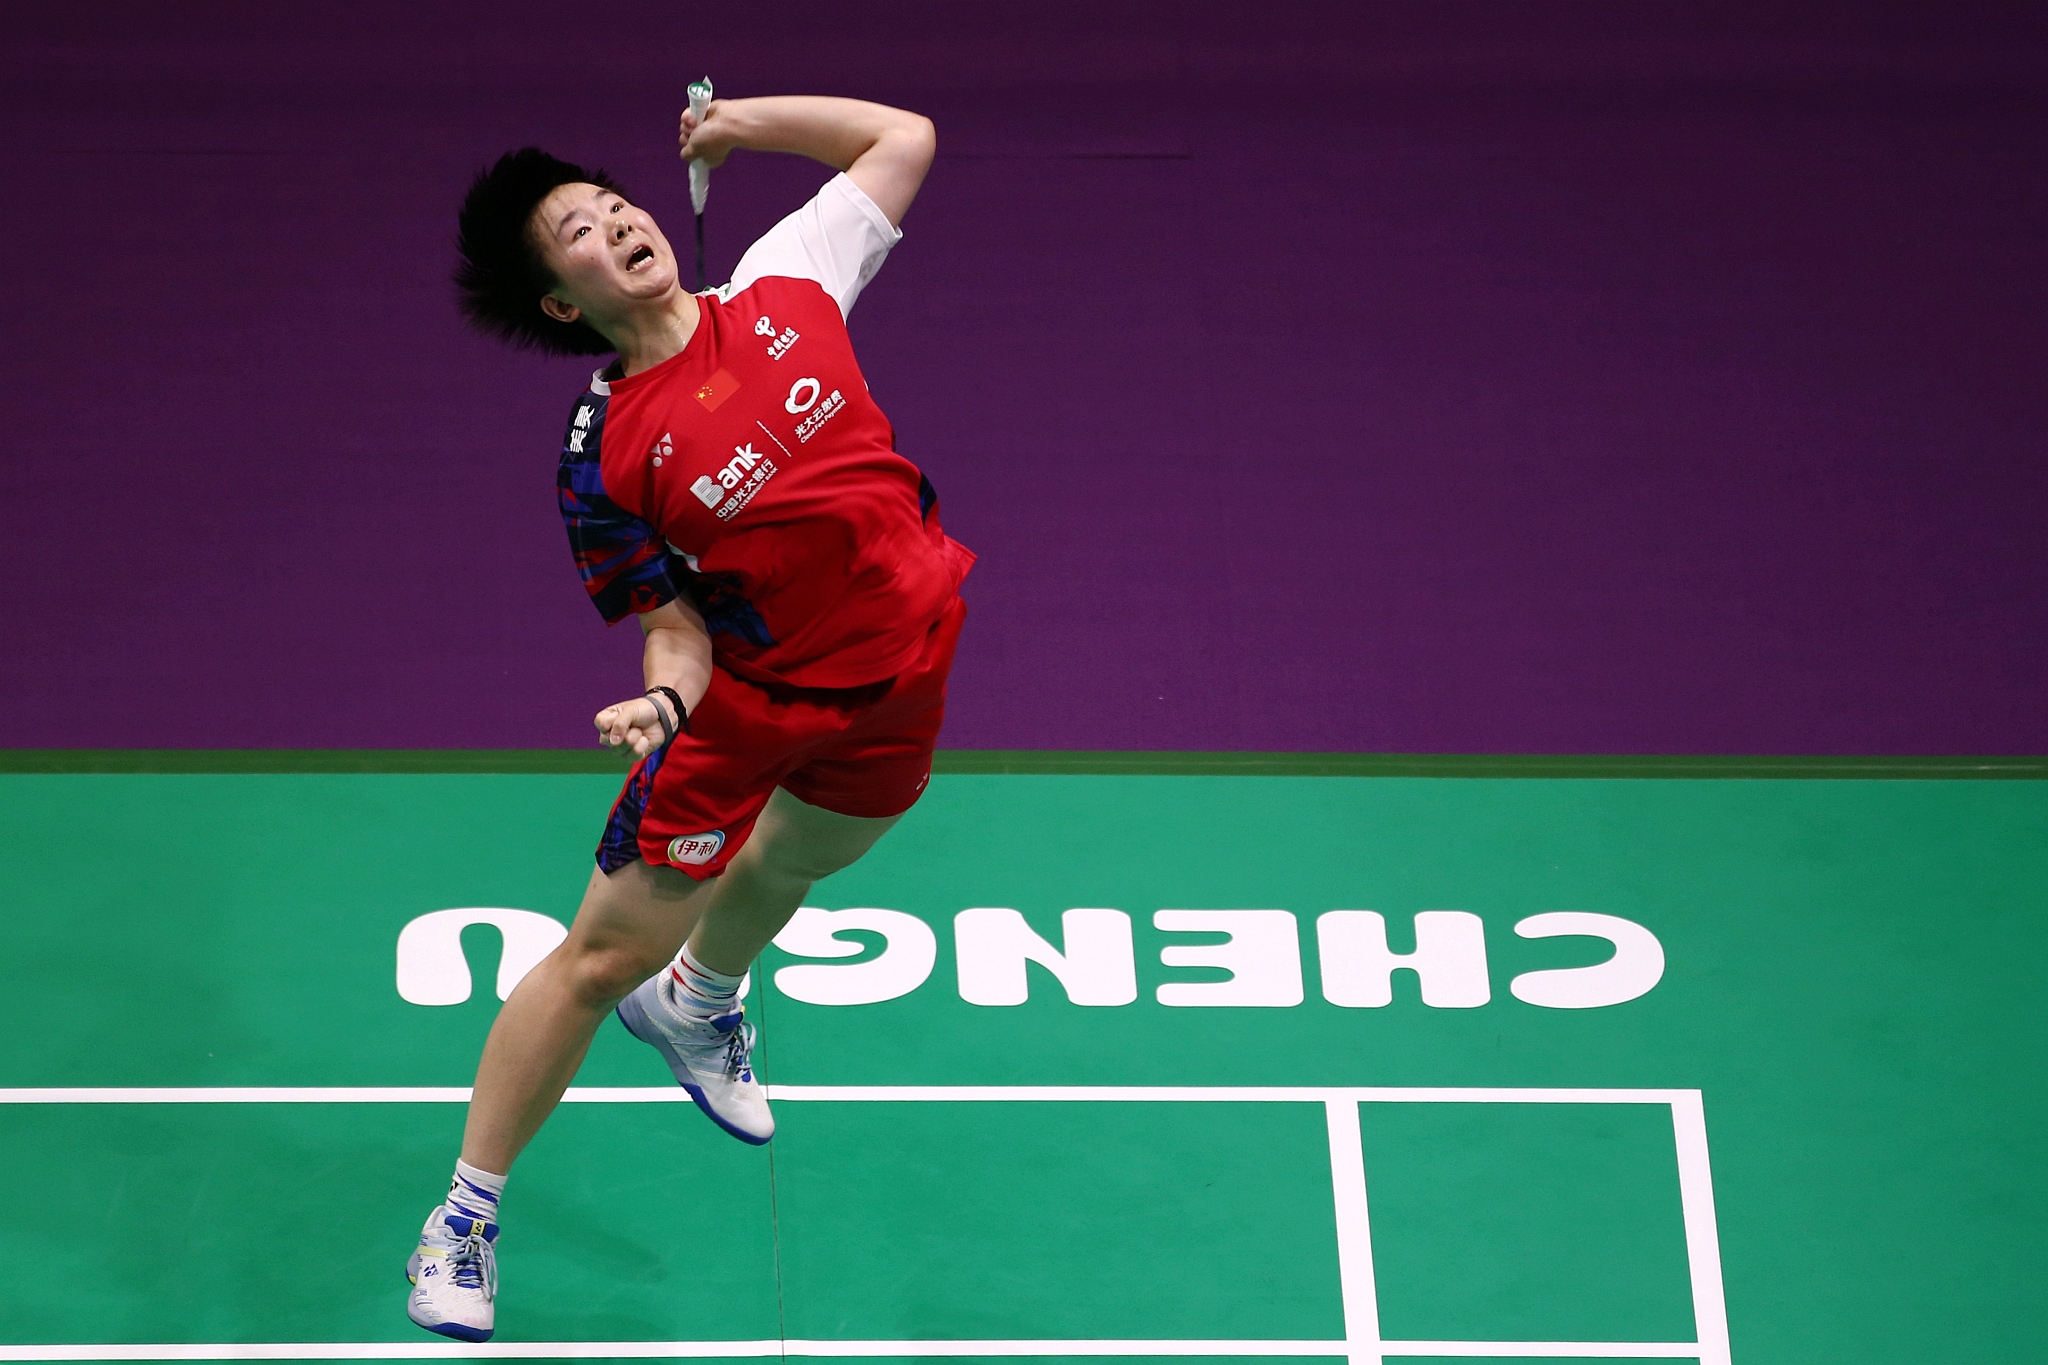 He Bingjiao of China jumps to save a shot in the third-round women's singles match during the Uber Cup quarterfinal in Chengdu, China, May 2, 2024. /CFP